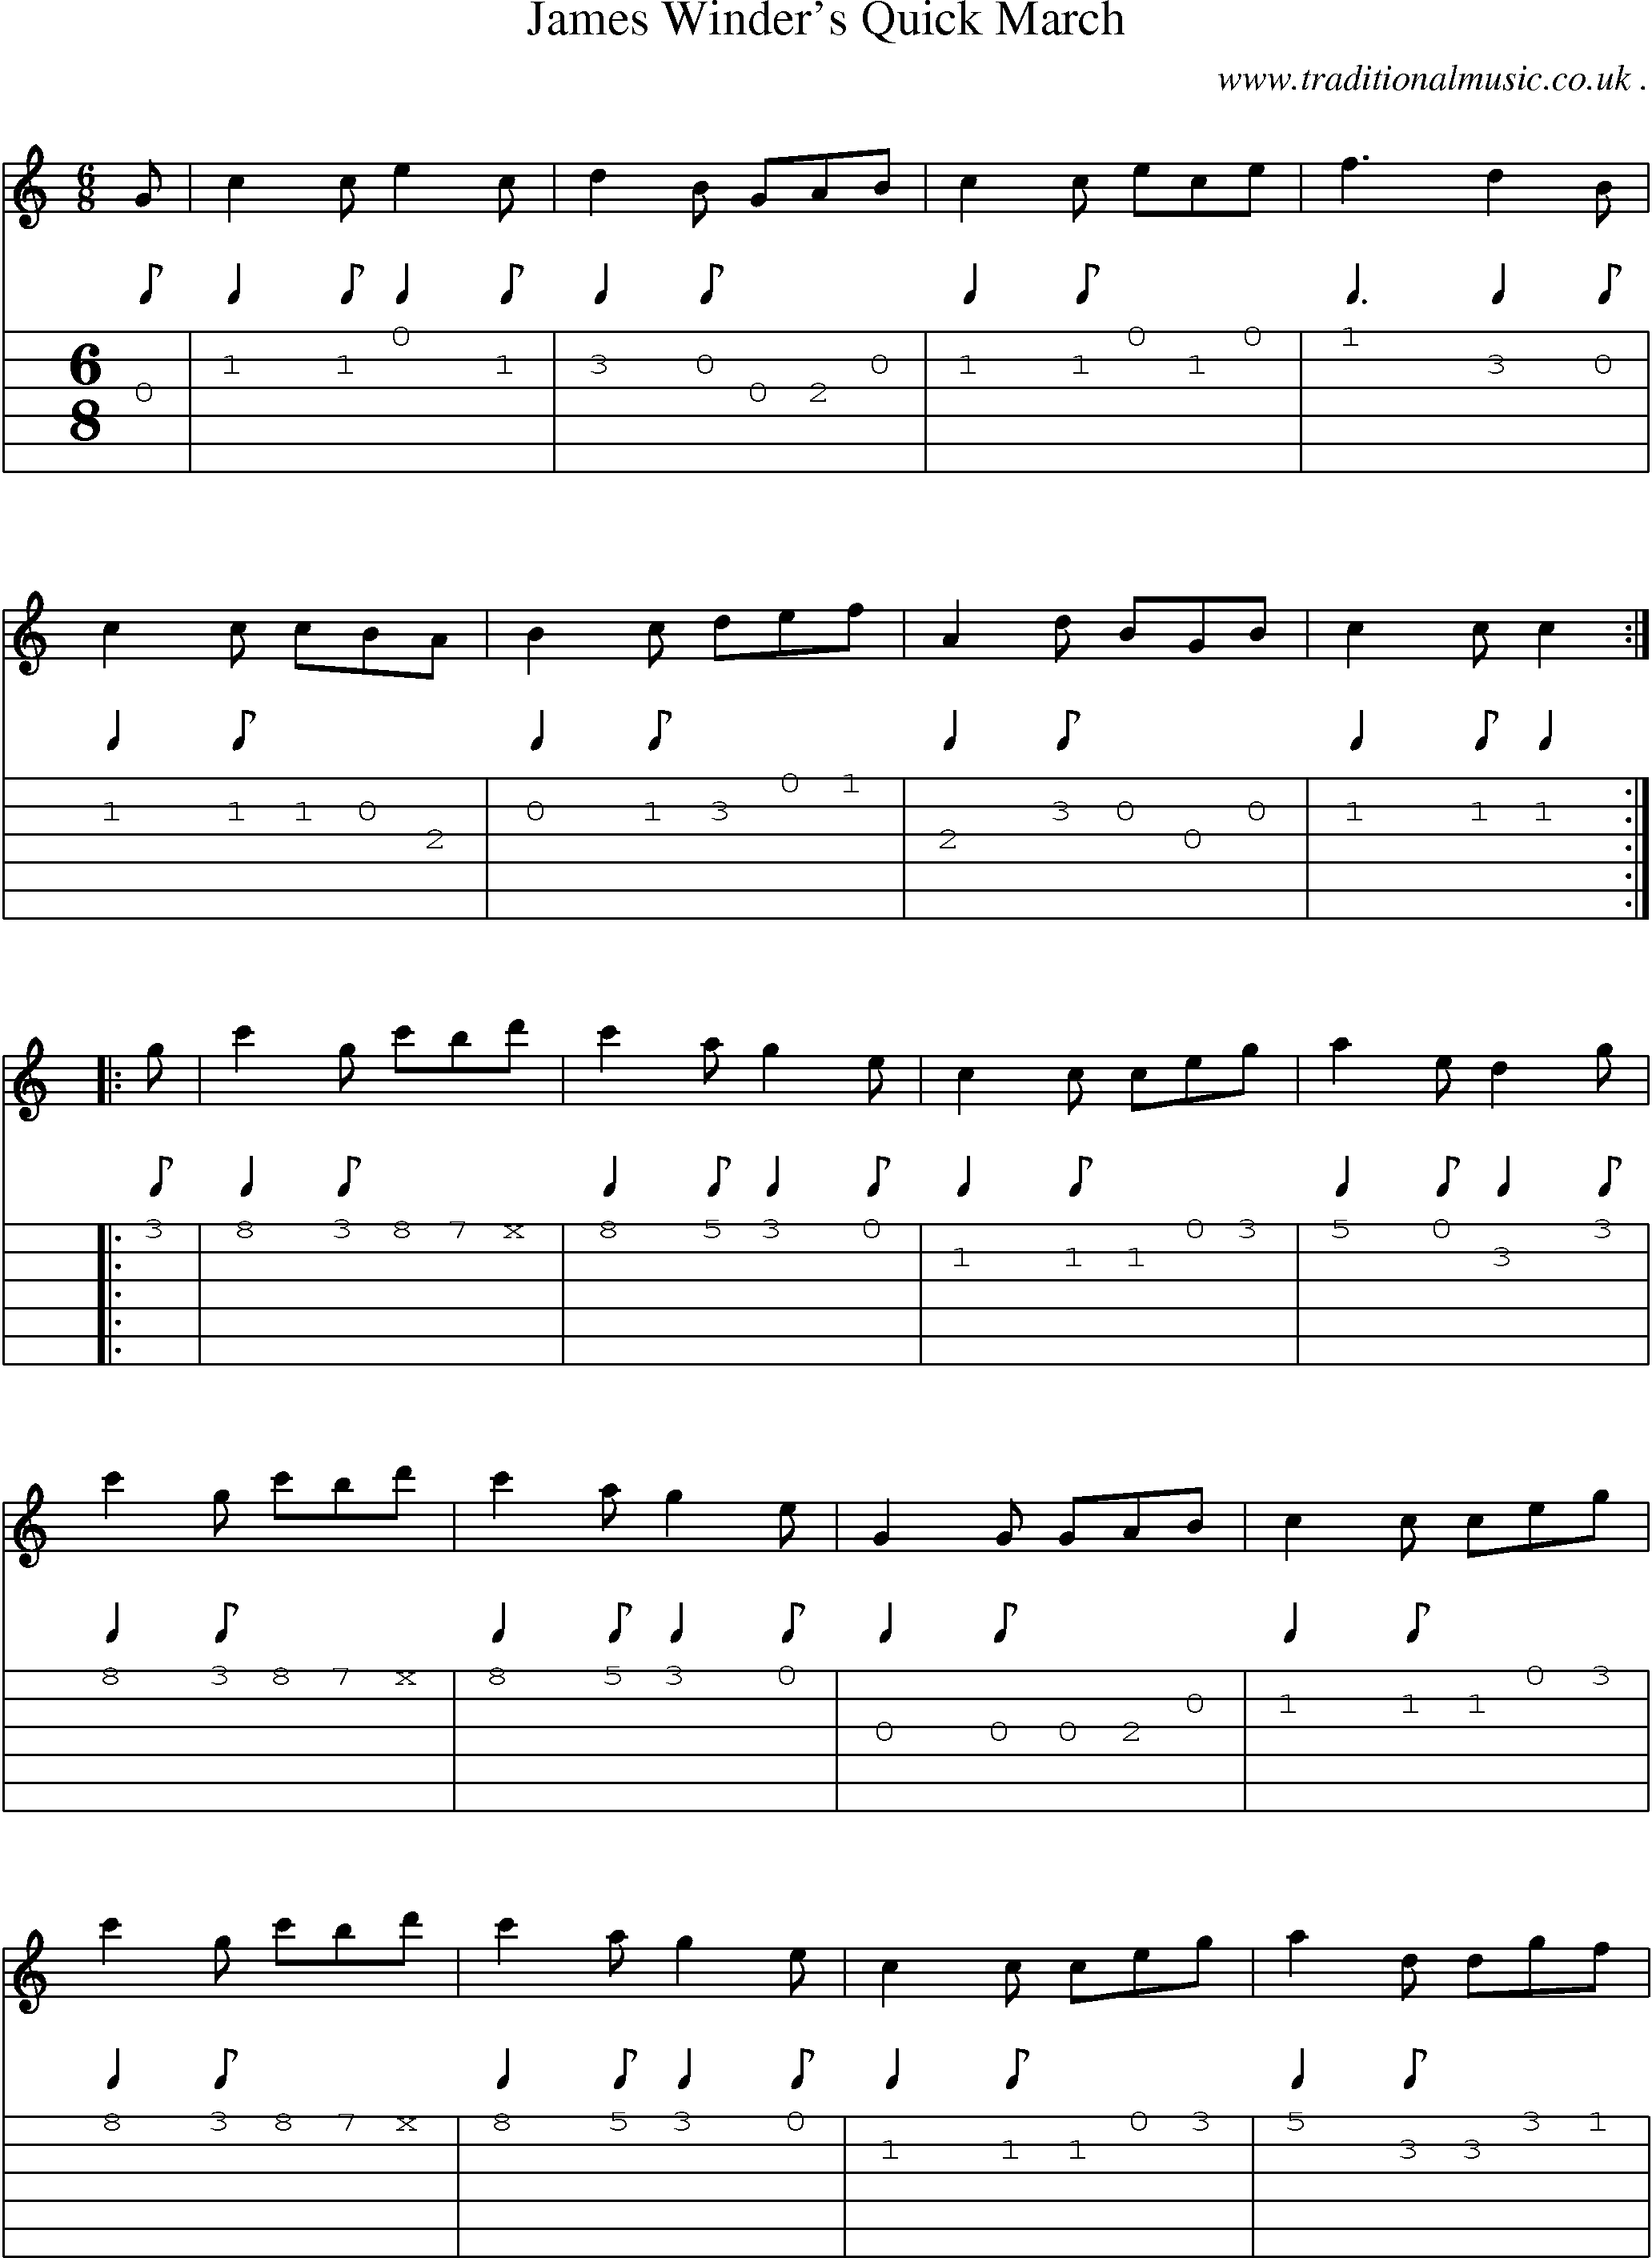 Sheet-Music and Guitar Tabs for James Winders Quick March